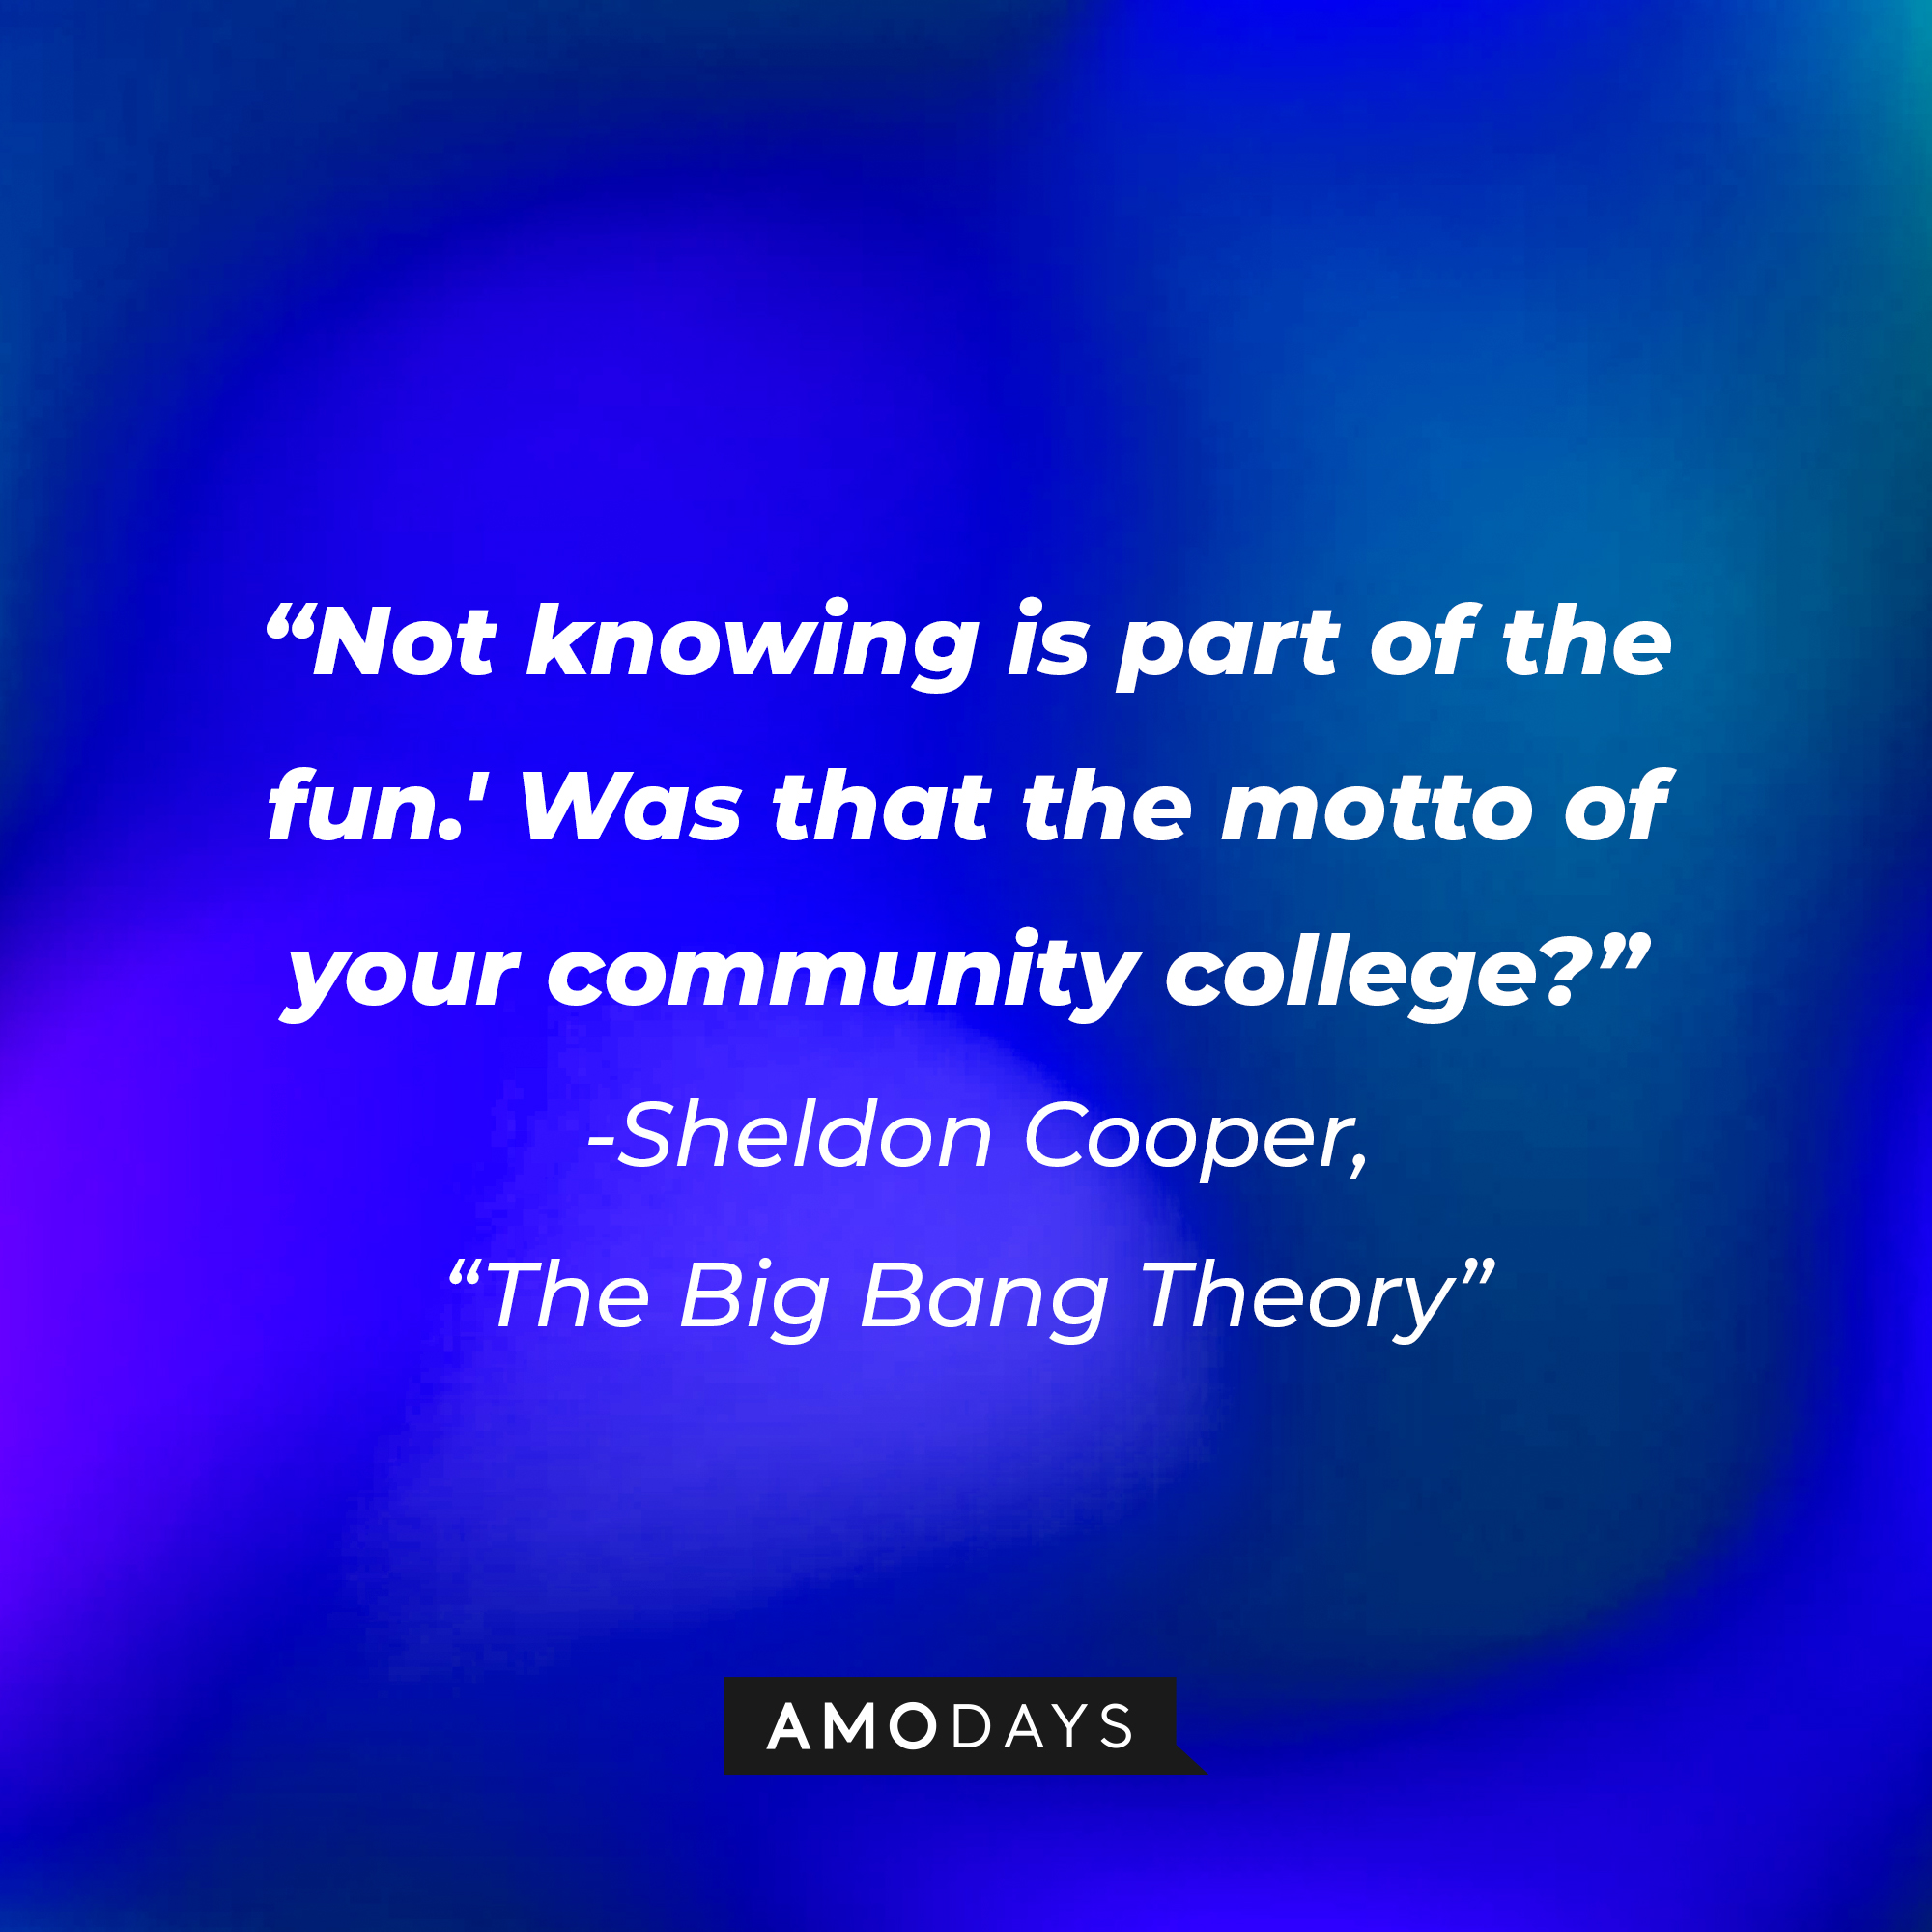 Sheldon Cooper's quote from "The Big Bang Theory": "'Not knowing is part of the fun.' Was that the motto of your community college?" | Source: Amodays